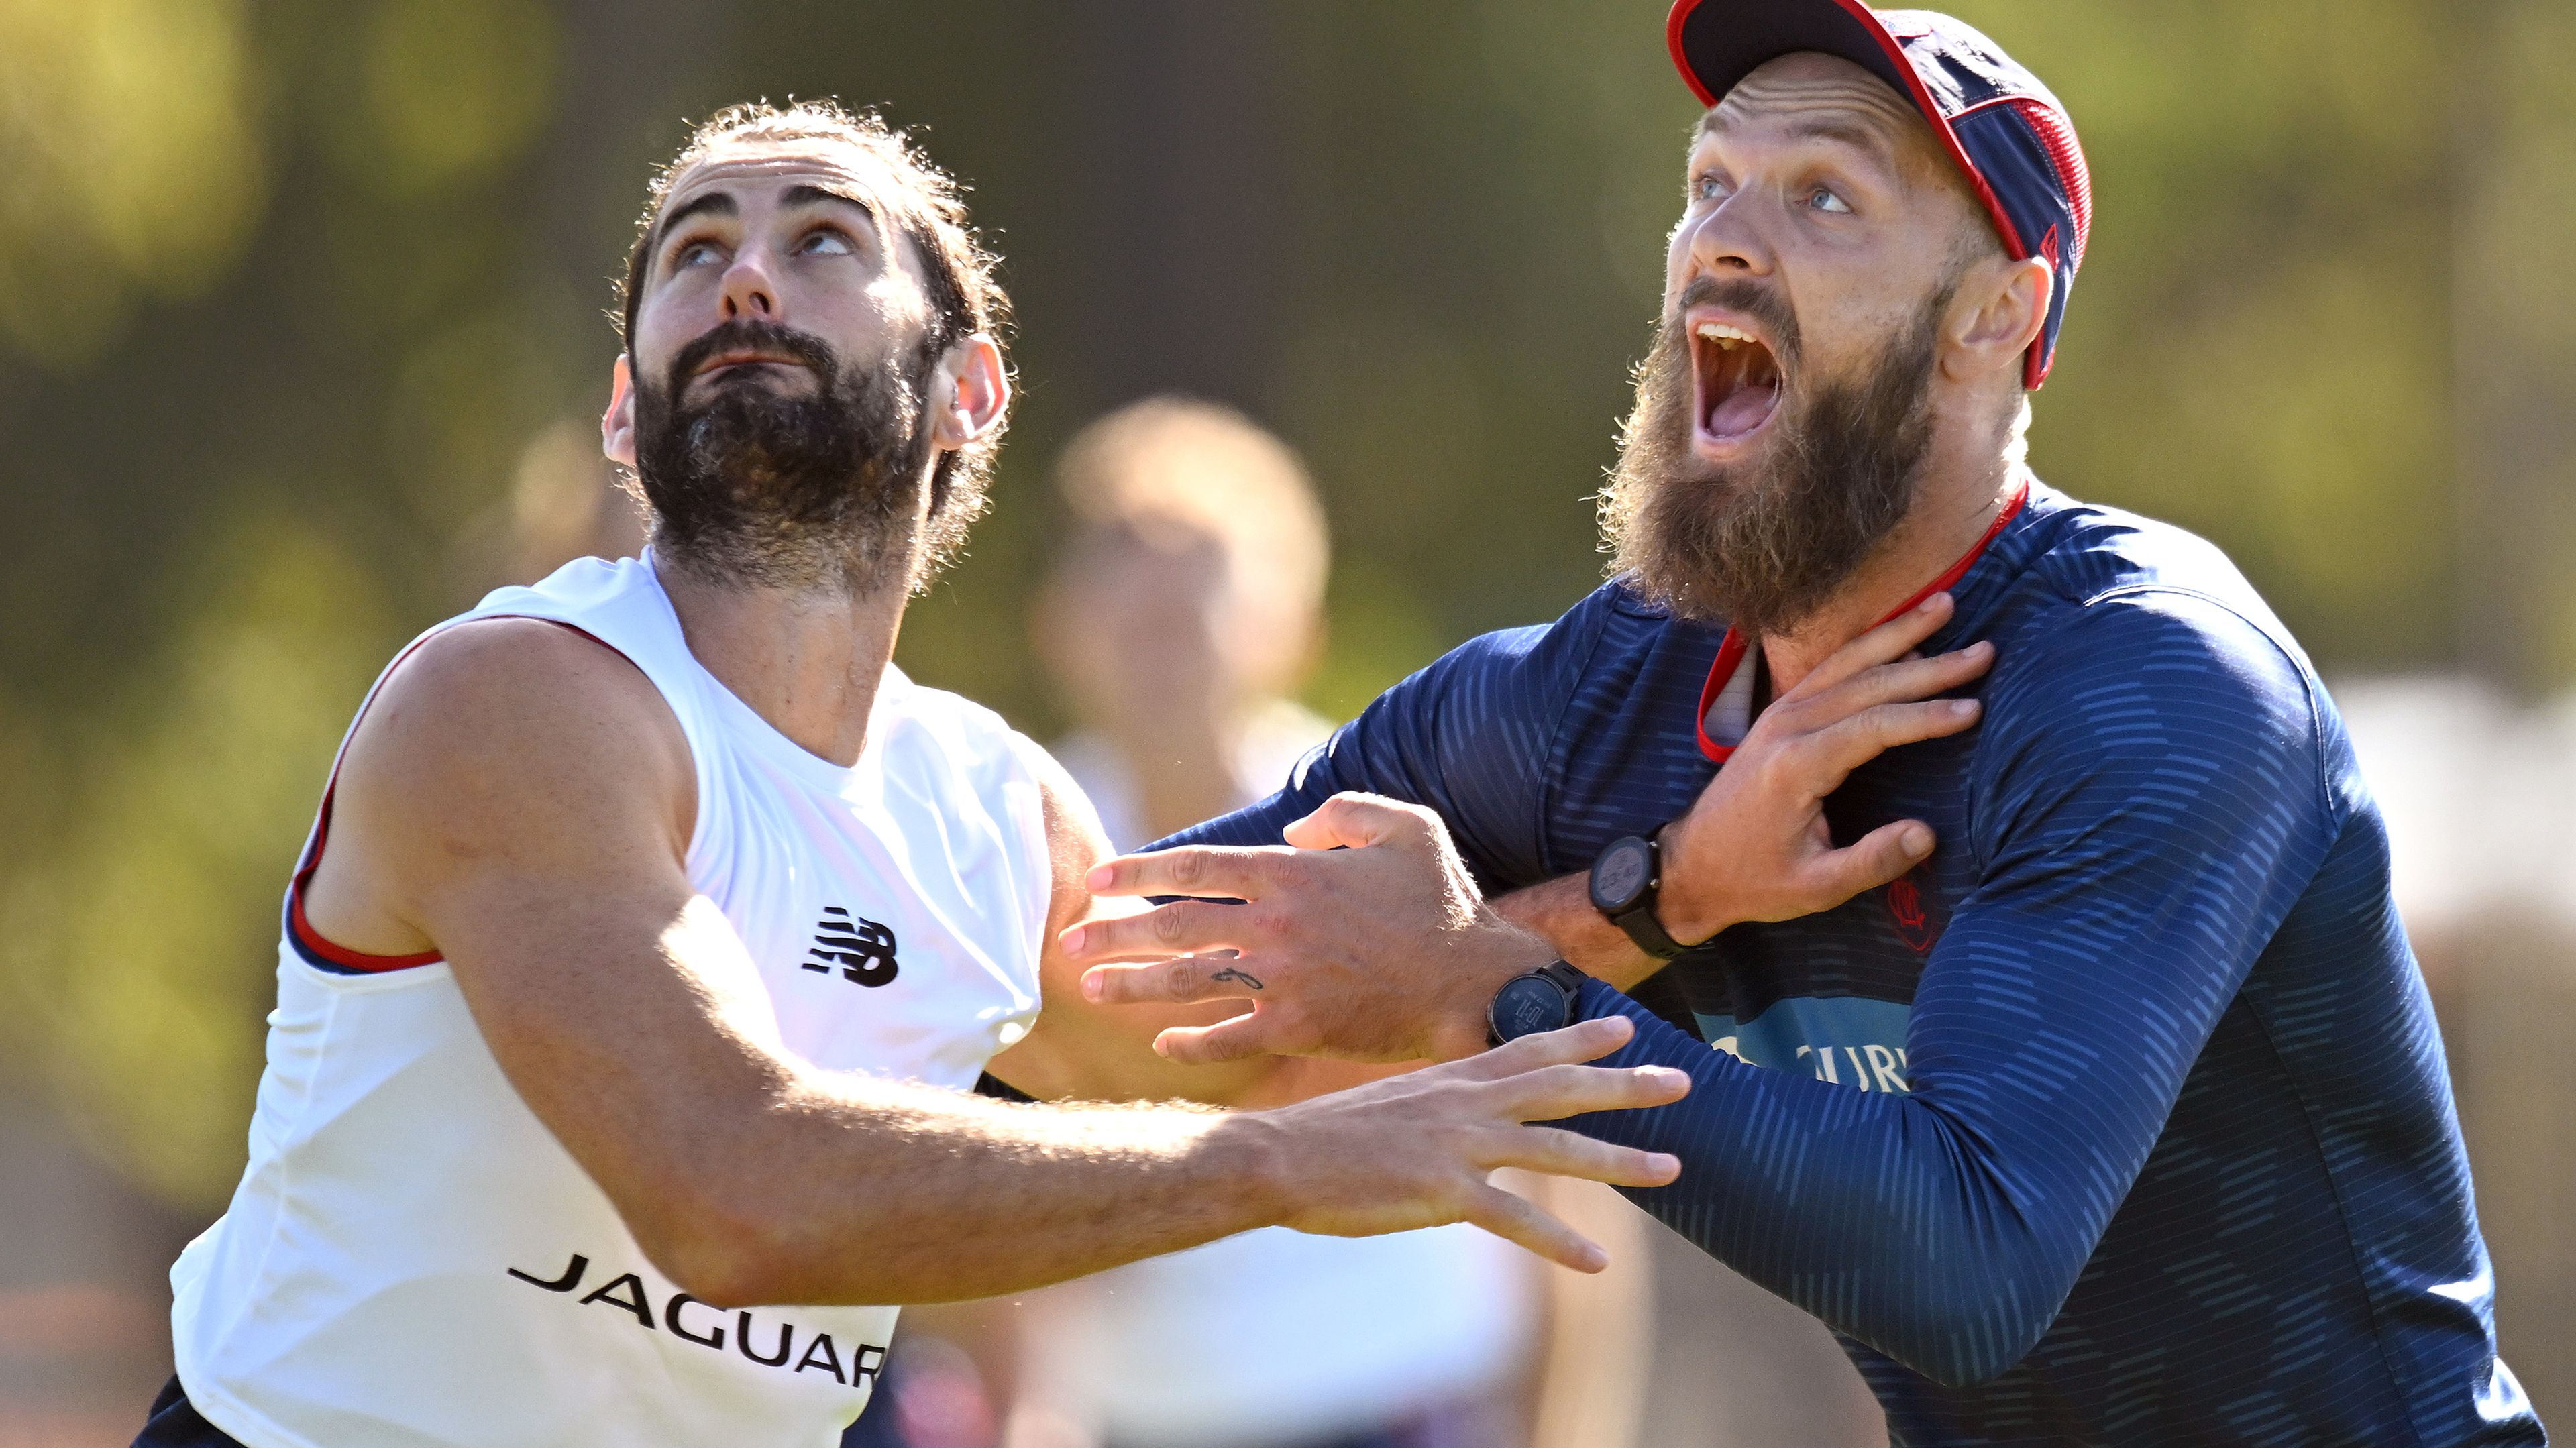 MELBOURNE, AUSTRALIA - MARCH 17: Brodie Grundy and Max Gawn of the Demons compete in the ruck during a Melbourne Demons AFL training session at Gosch&#x27;s Paddock on March 17, 2023 in Melbourne, Australia. (Photo by Morgan Hancock/Getty Images)